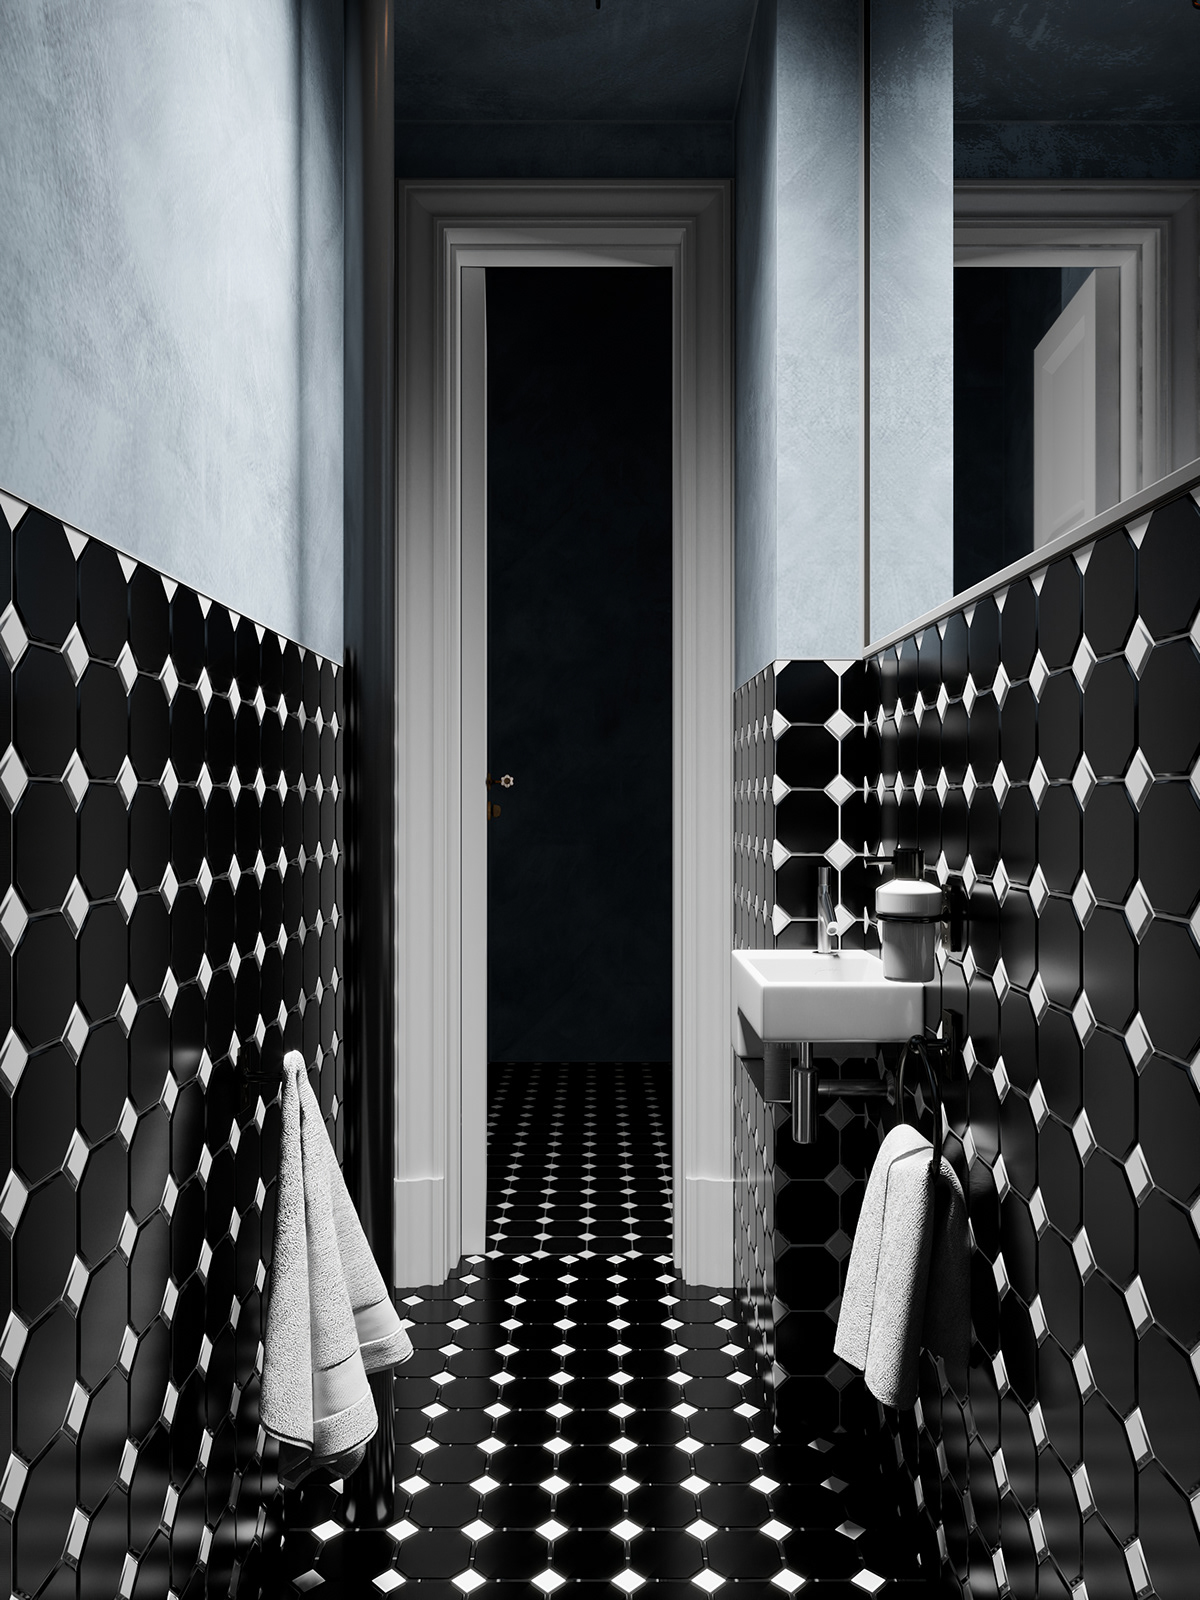 The floor and walls of the bathroom are both covered with ceramic tiles in black and white motifs, creating a vibrant Renaissance background that is both eye-catching and lively.